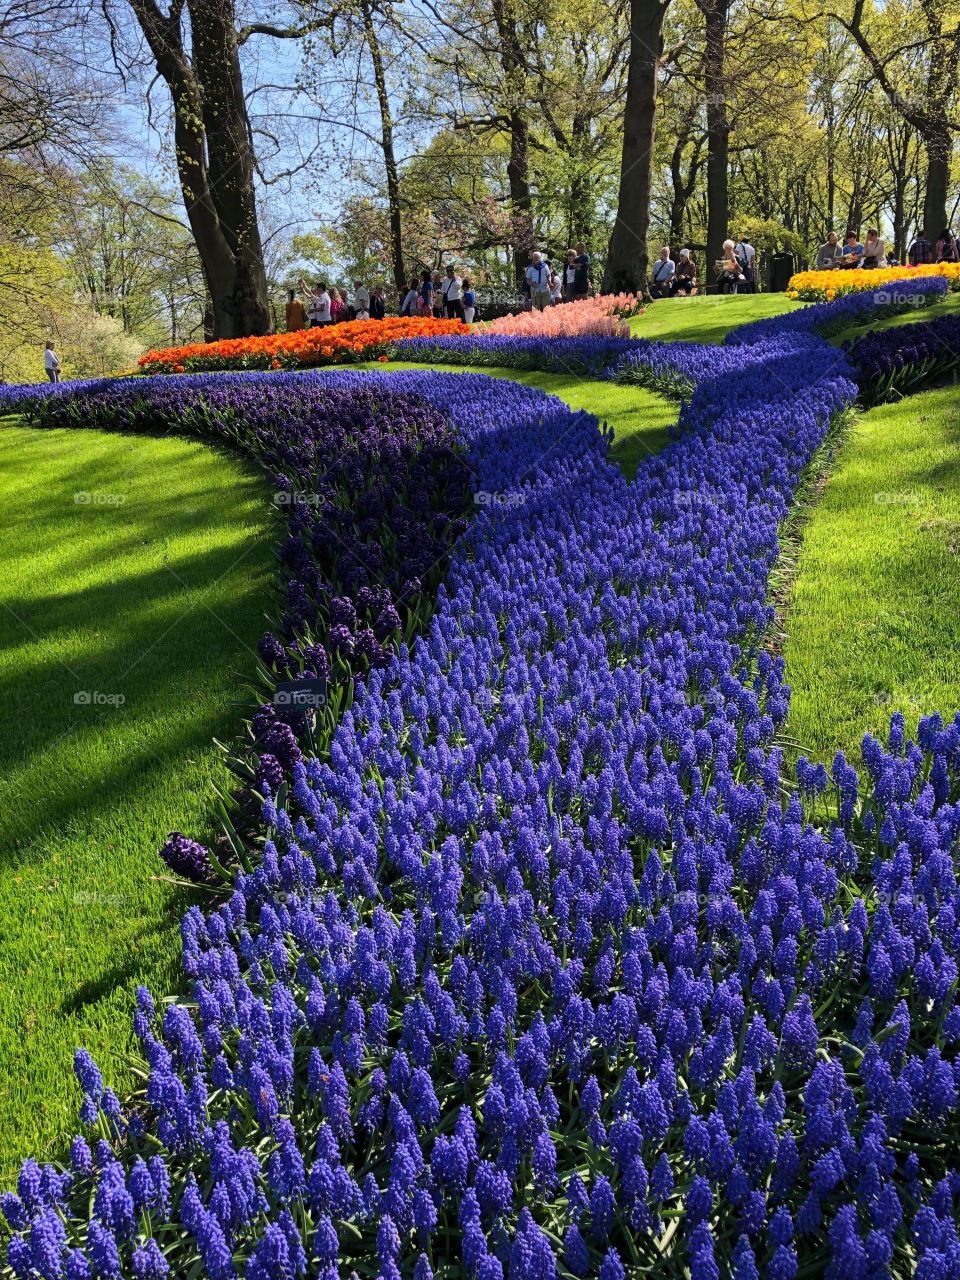 Amazing view of floral park in Netherlands.